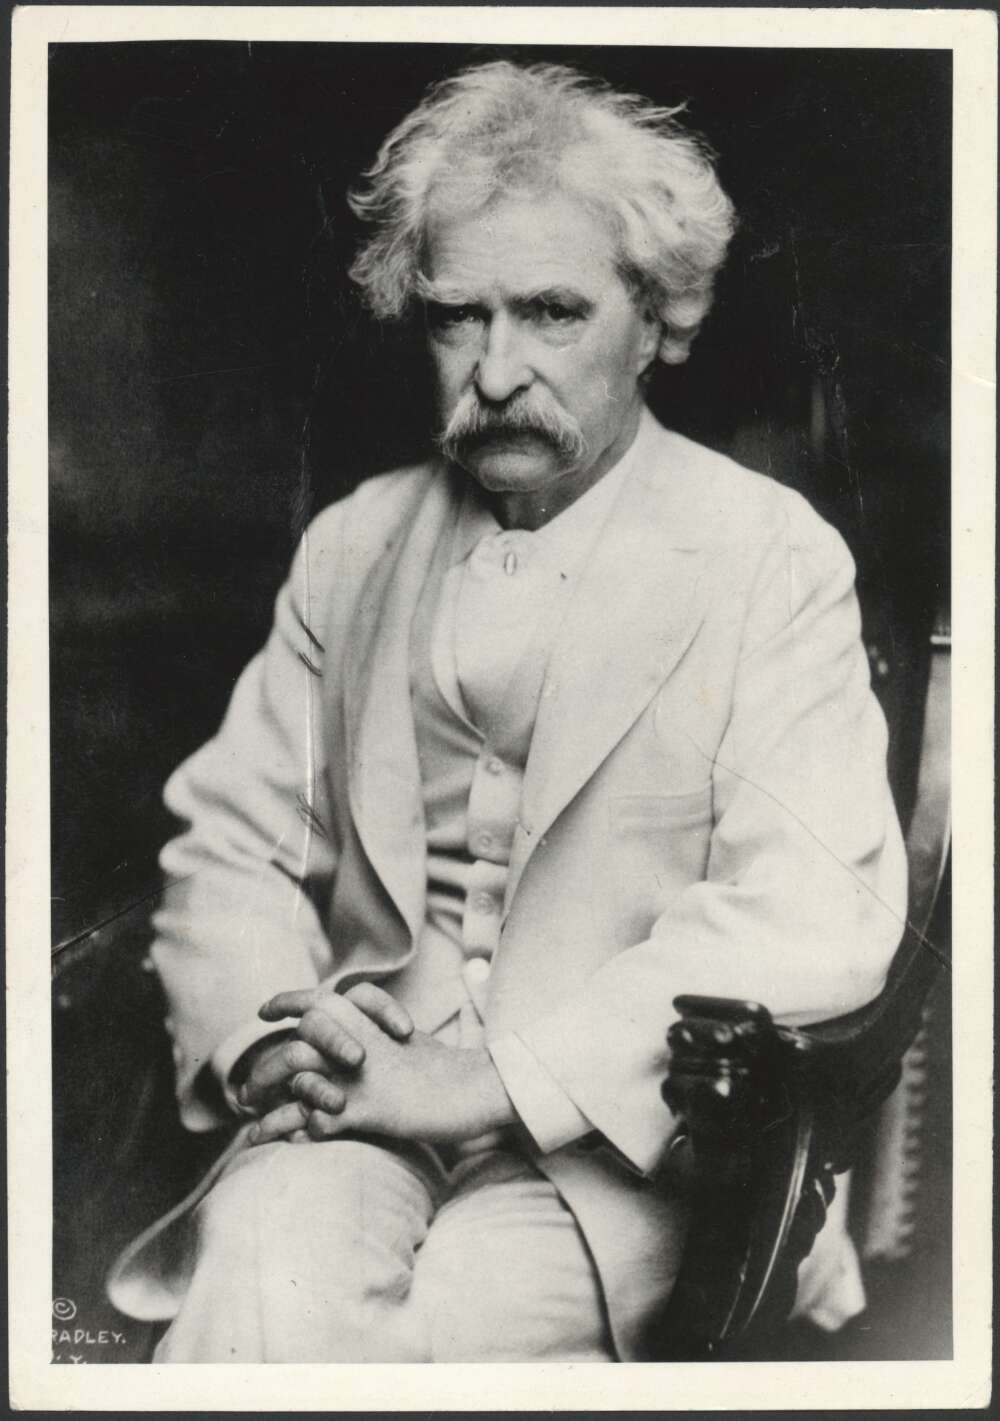 A black and white photograph of a man wearing a white suit. He is sitting down and also has a moustache.